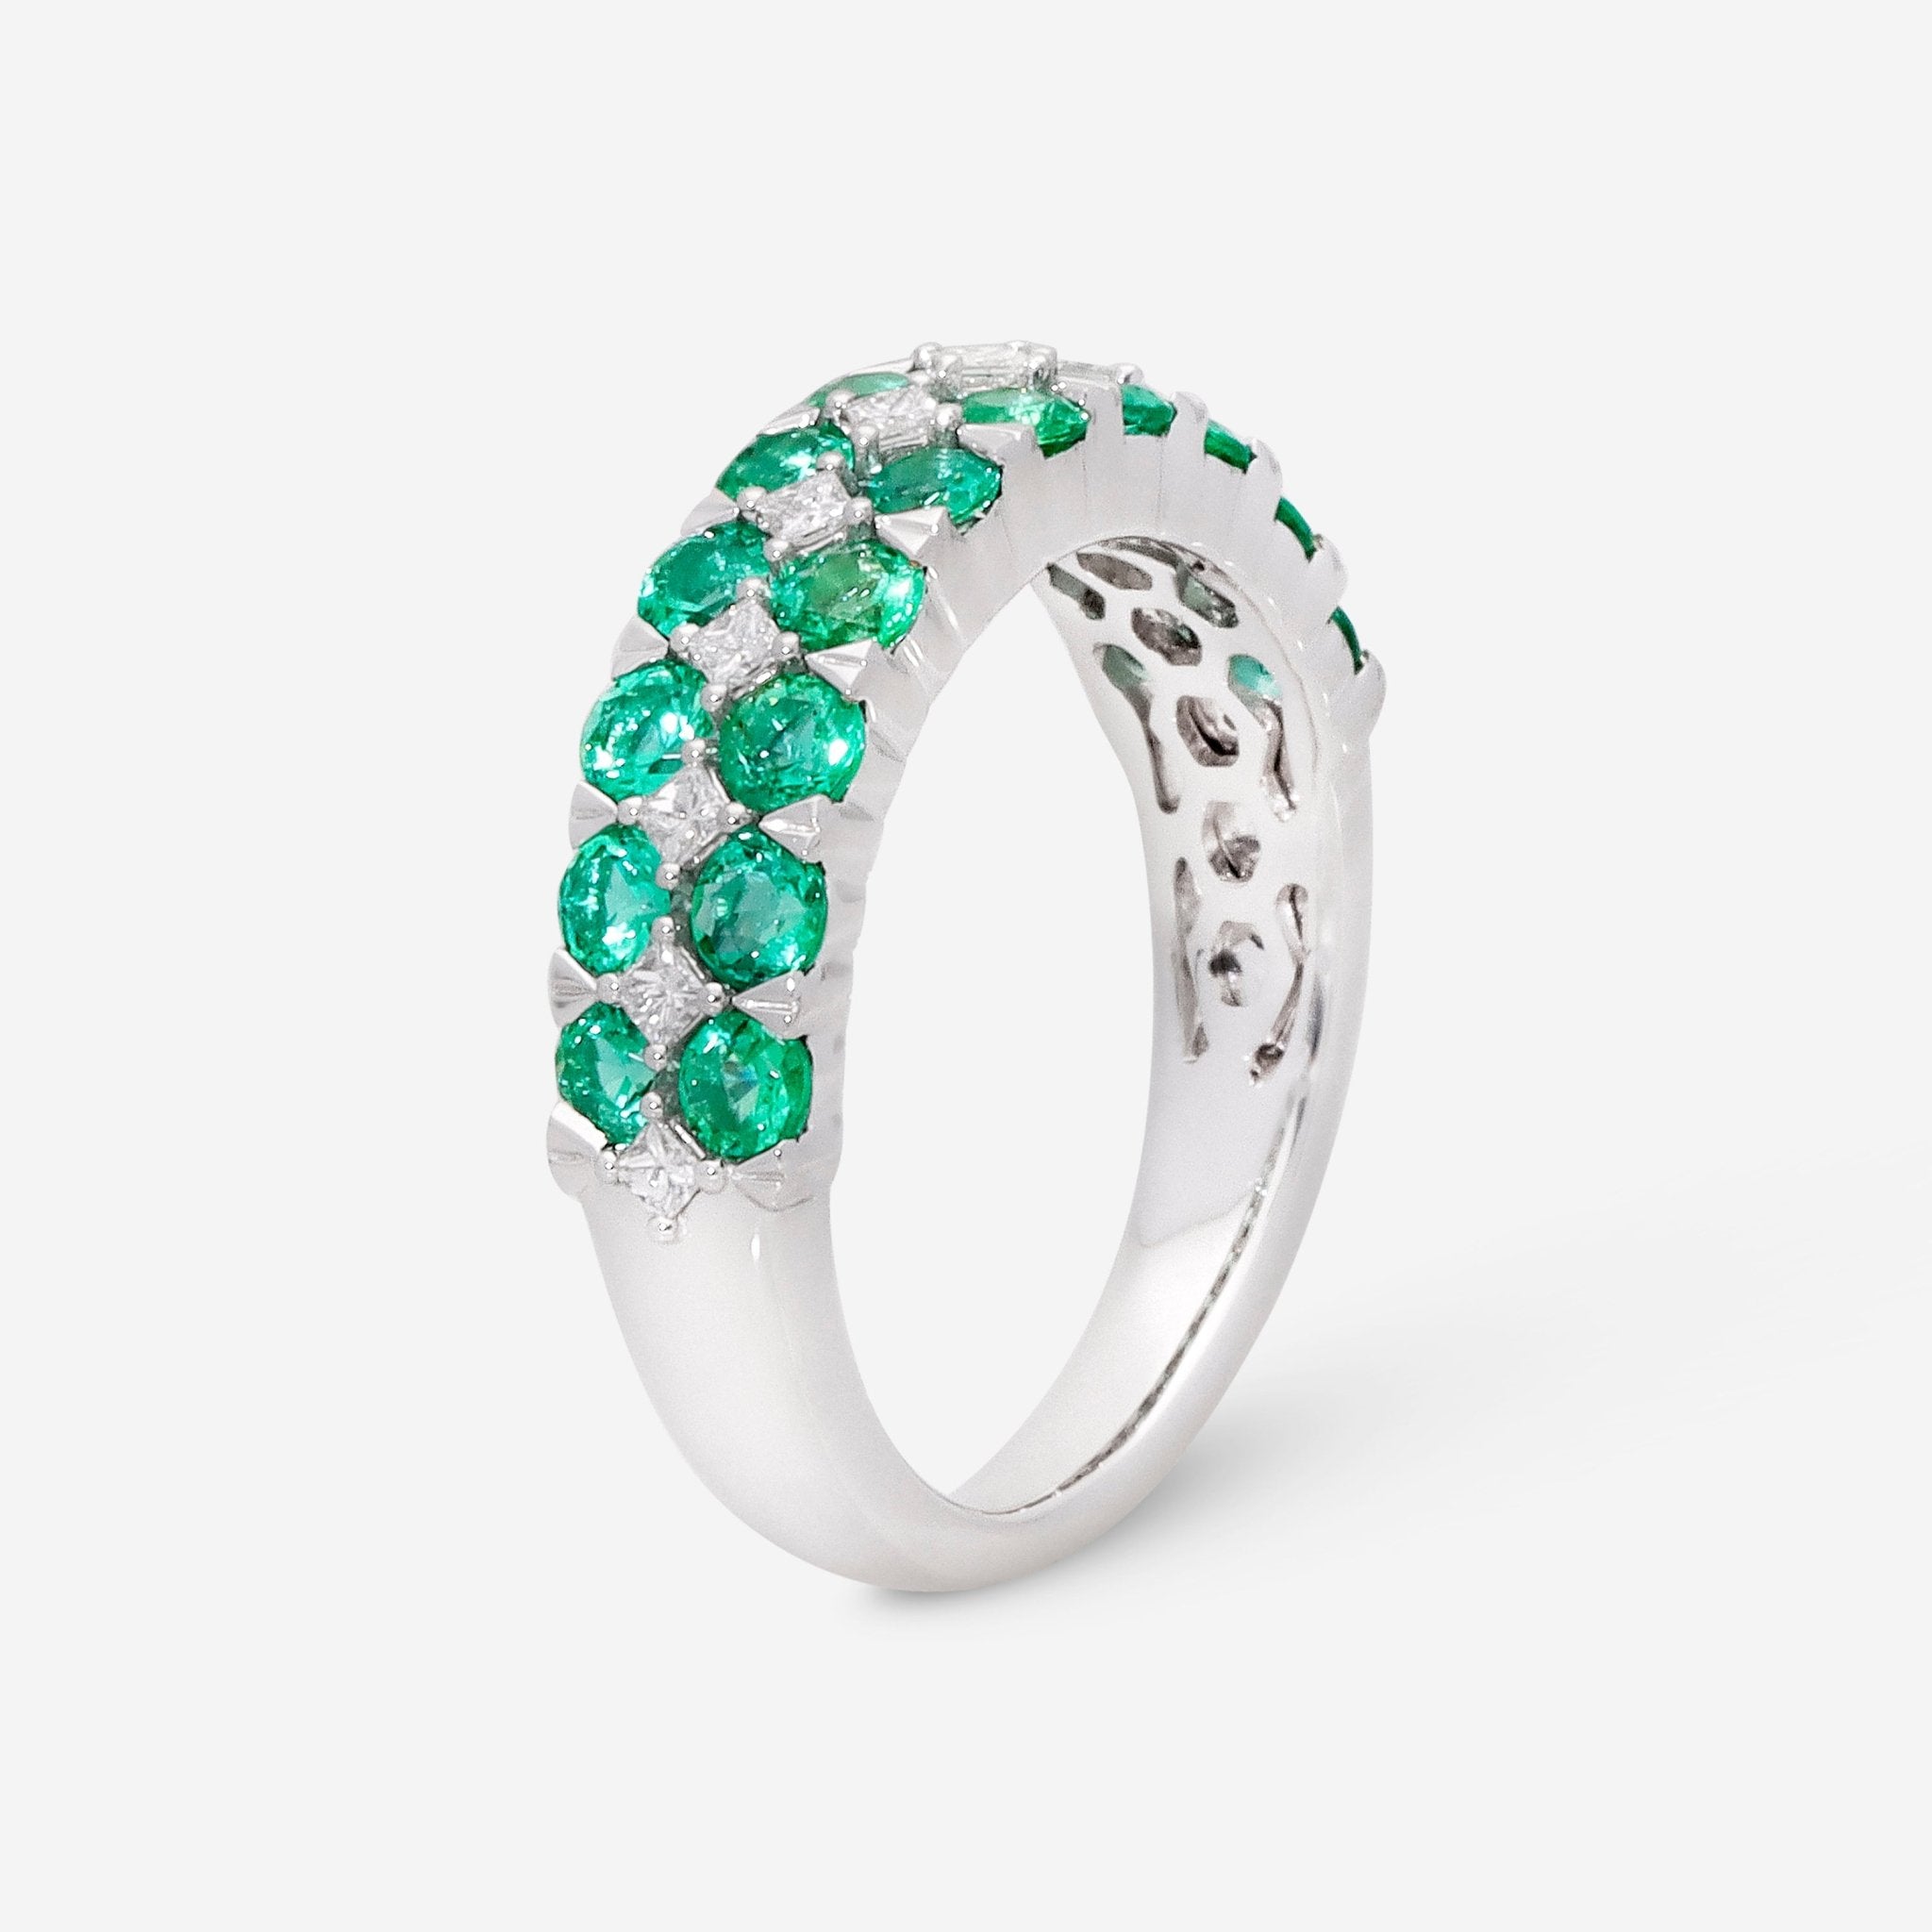 Ina Mar 14K White Gold Emerald and Diamond Double Row Ring RG - 085922 - EMD - THE SOLIST - Ina Mar